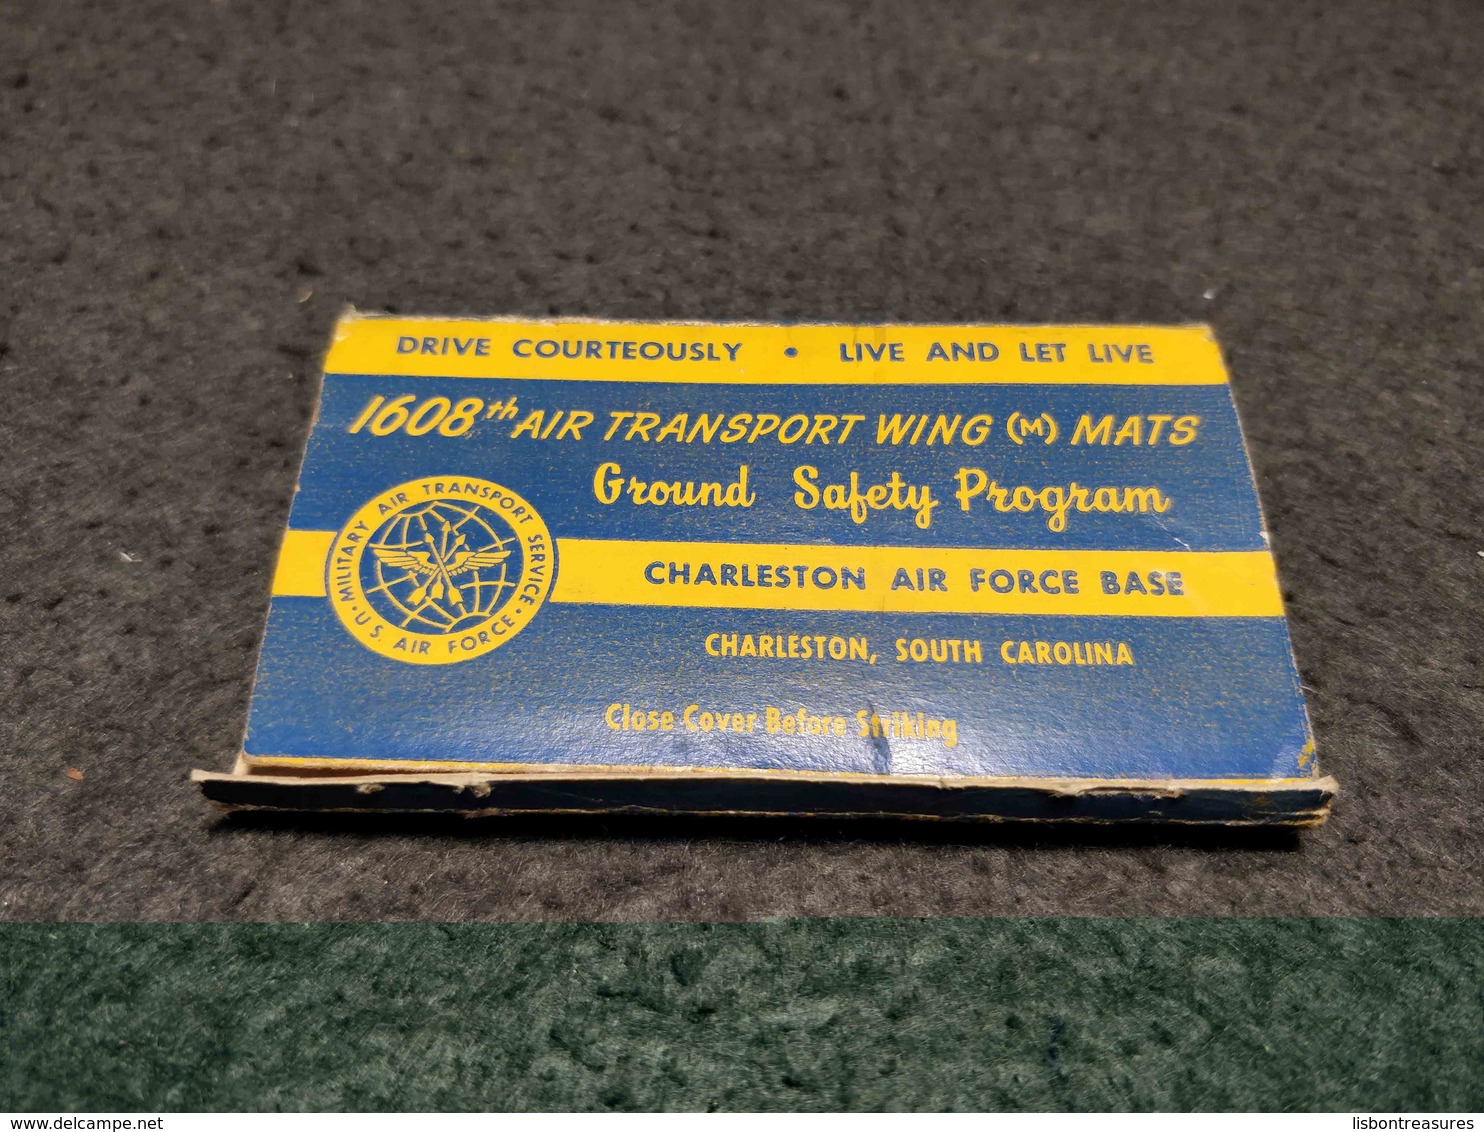 ANTIQUE MATCHBOX MATCHES LABEL ADVERTISING CHARLESTON AIR FORCE BASE MILITARY UNITED STATES - Matchboxes